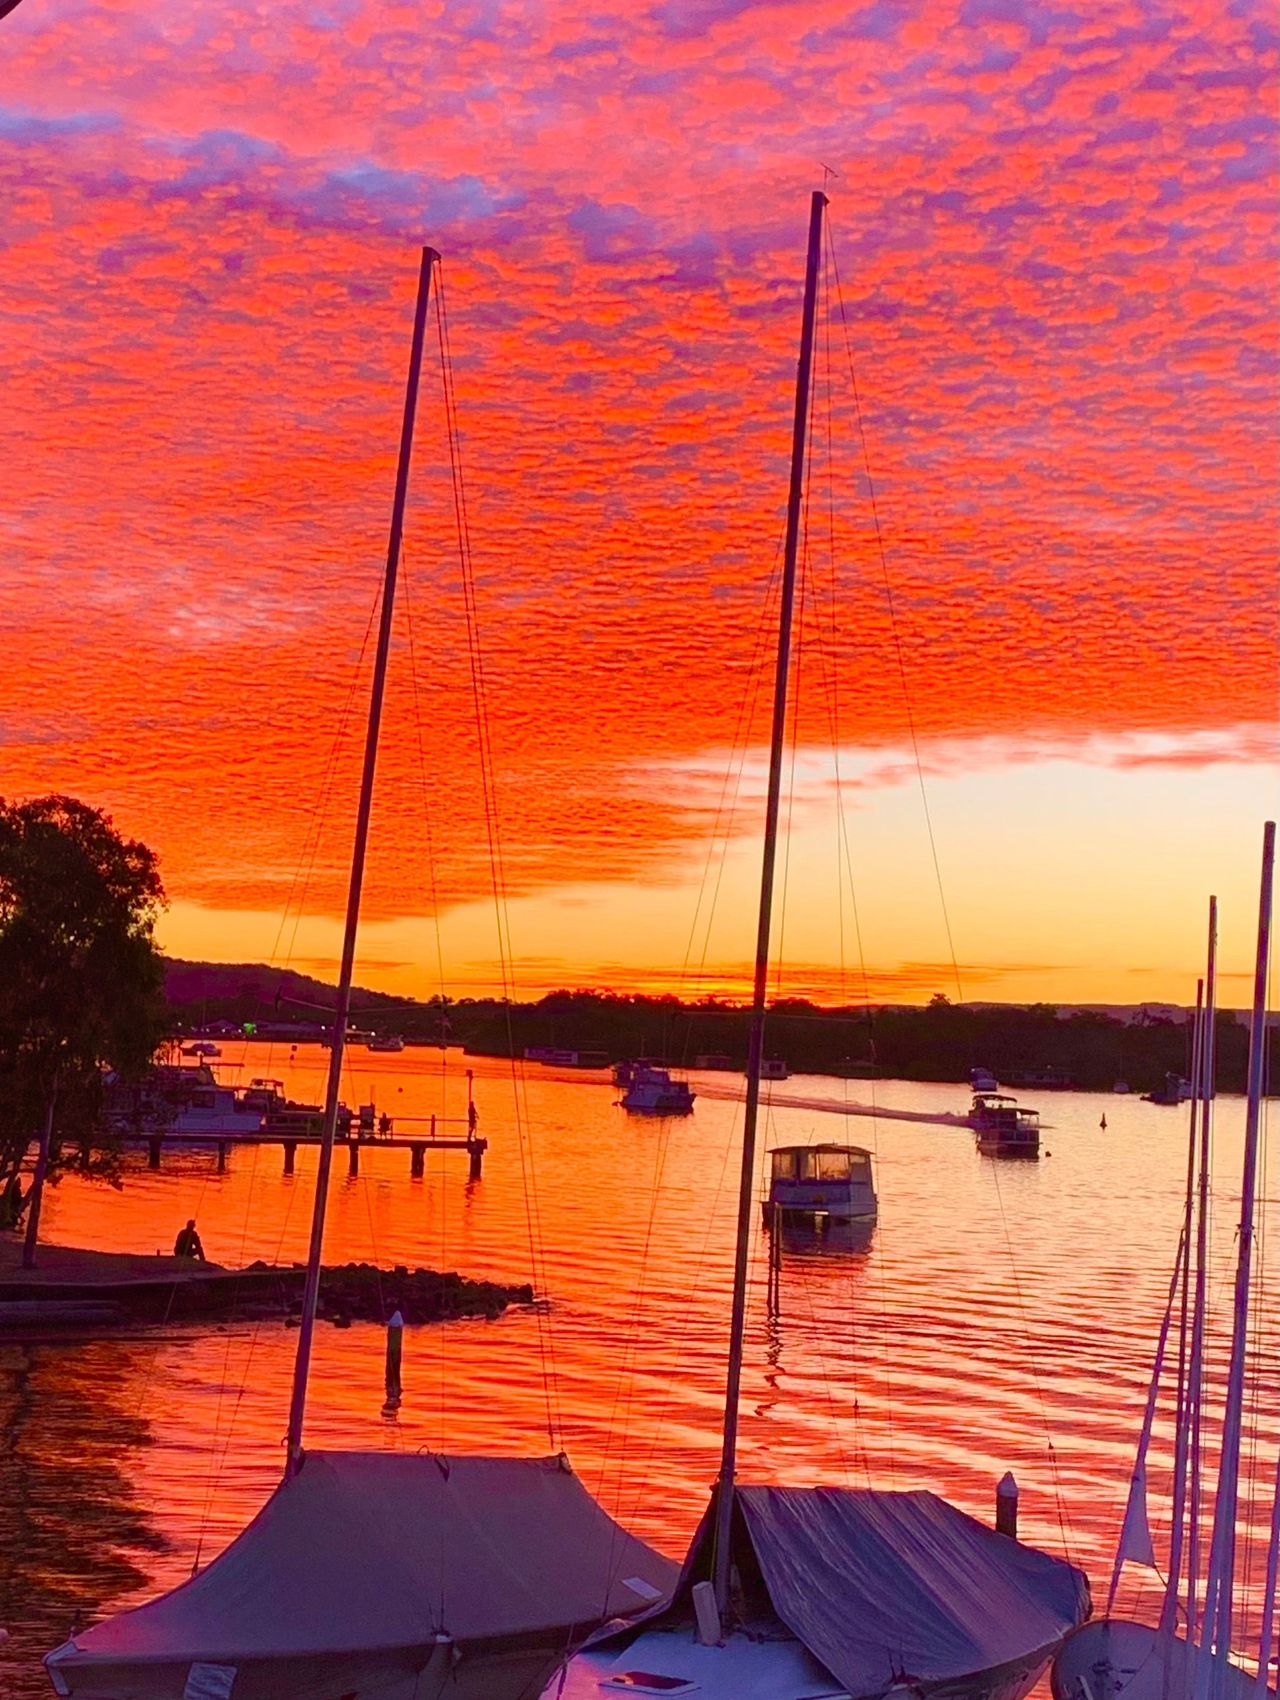 brightly coloured sunset on Noosa River with sailboats